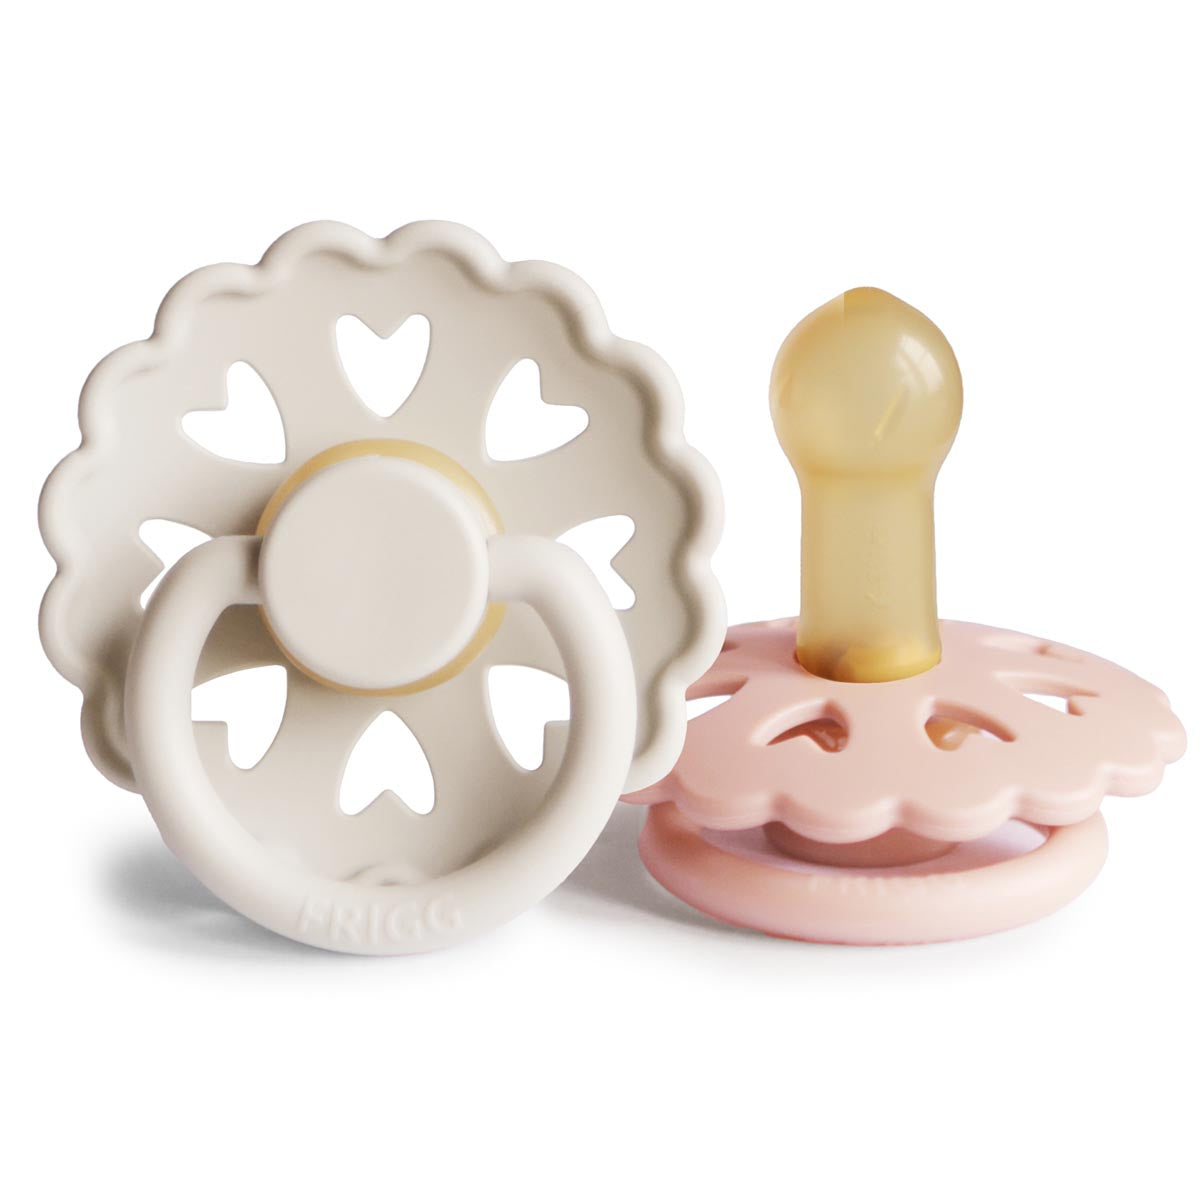 FRIGG Fairytale Pacifier 2 Pack Latex